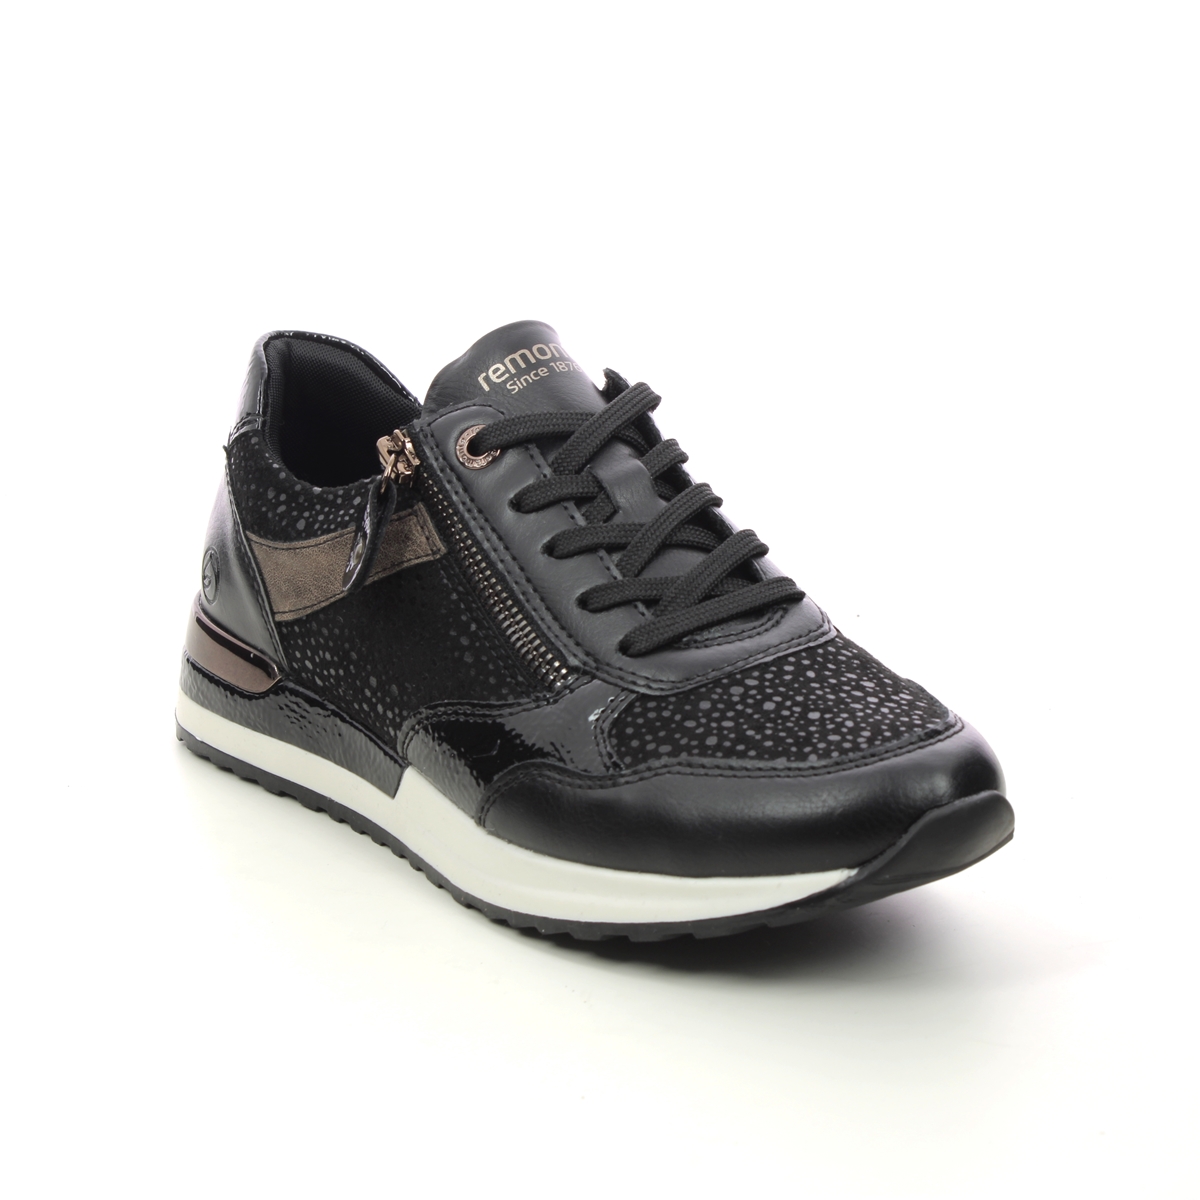 Remonte Vapour Lulea Black Womens Trainers R2548-01 In Size 38 In Plain Black